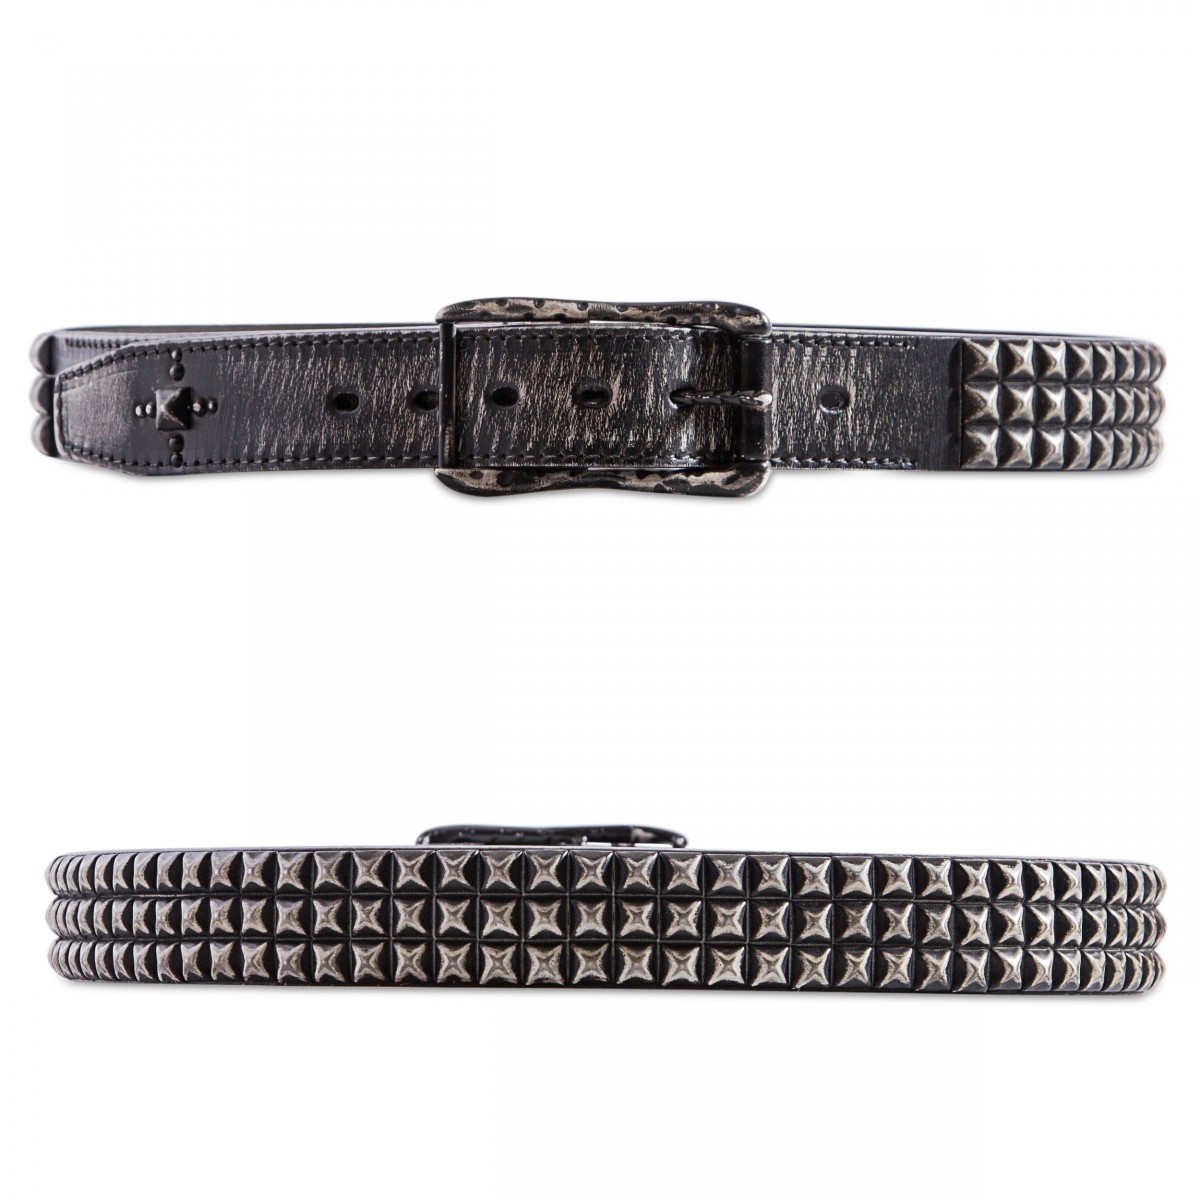 Triple Row Pyramid Stud Distressed Leather Belt 1.5in Width Sizes 30 ...